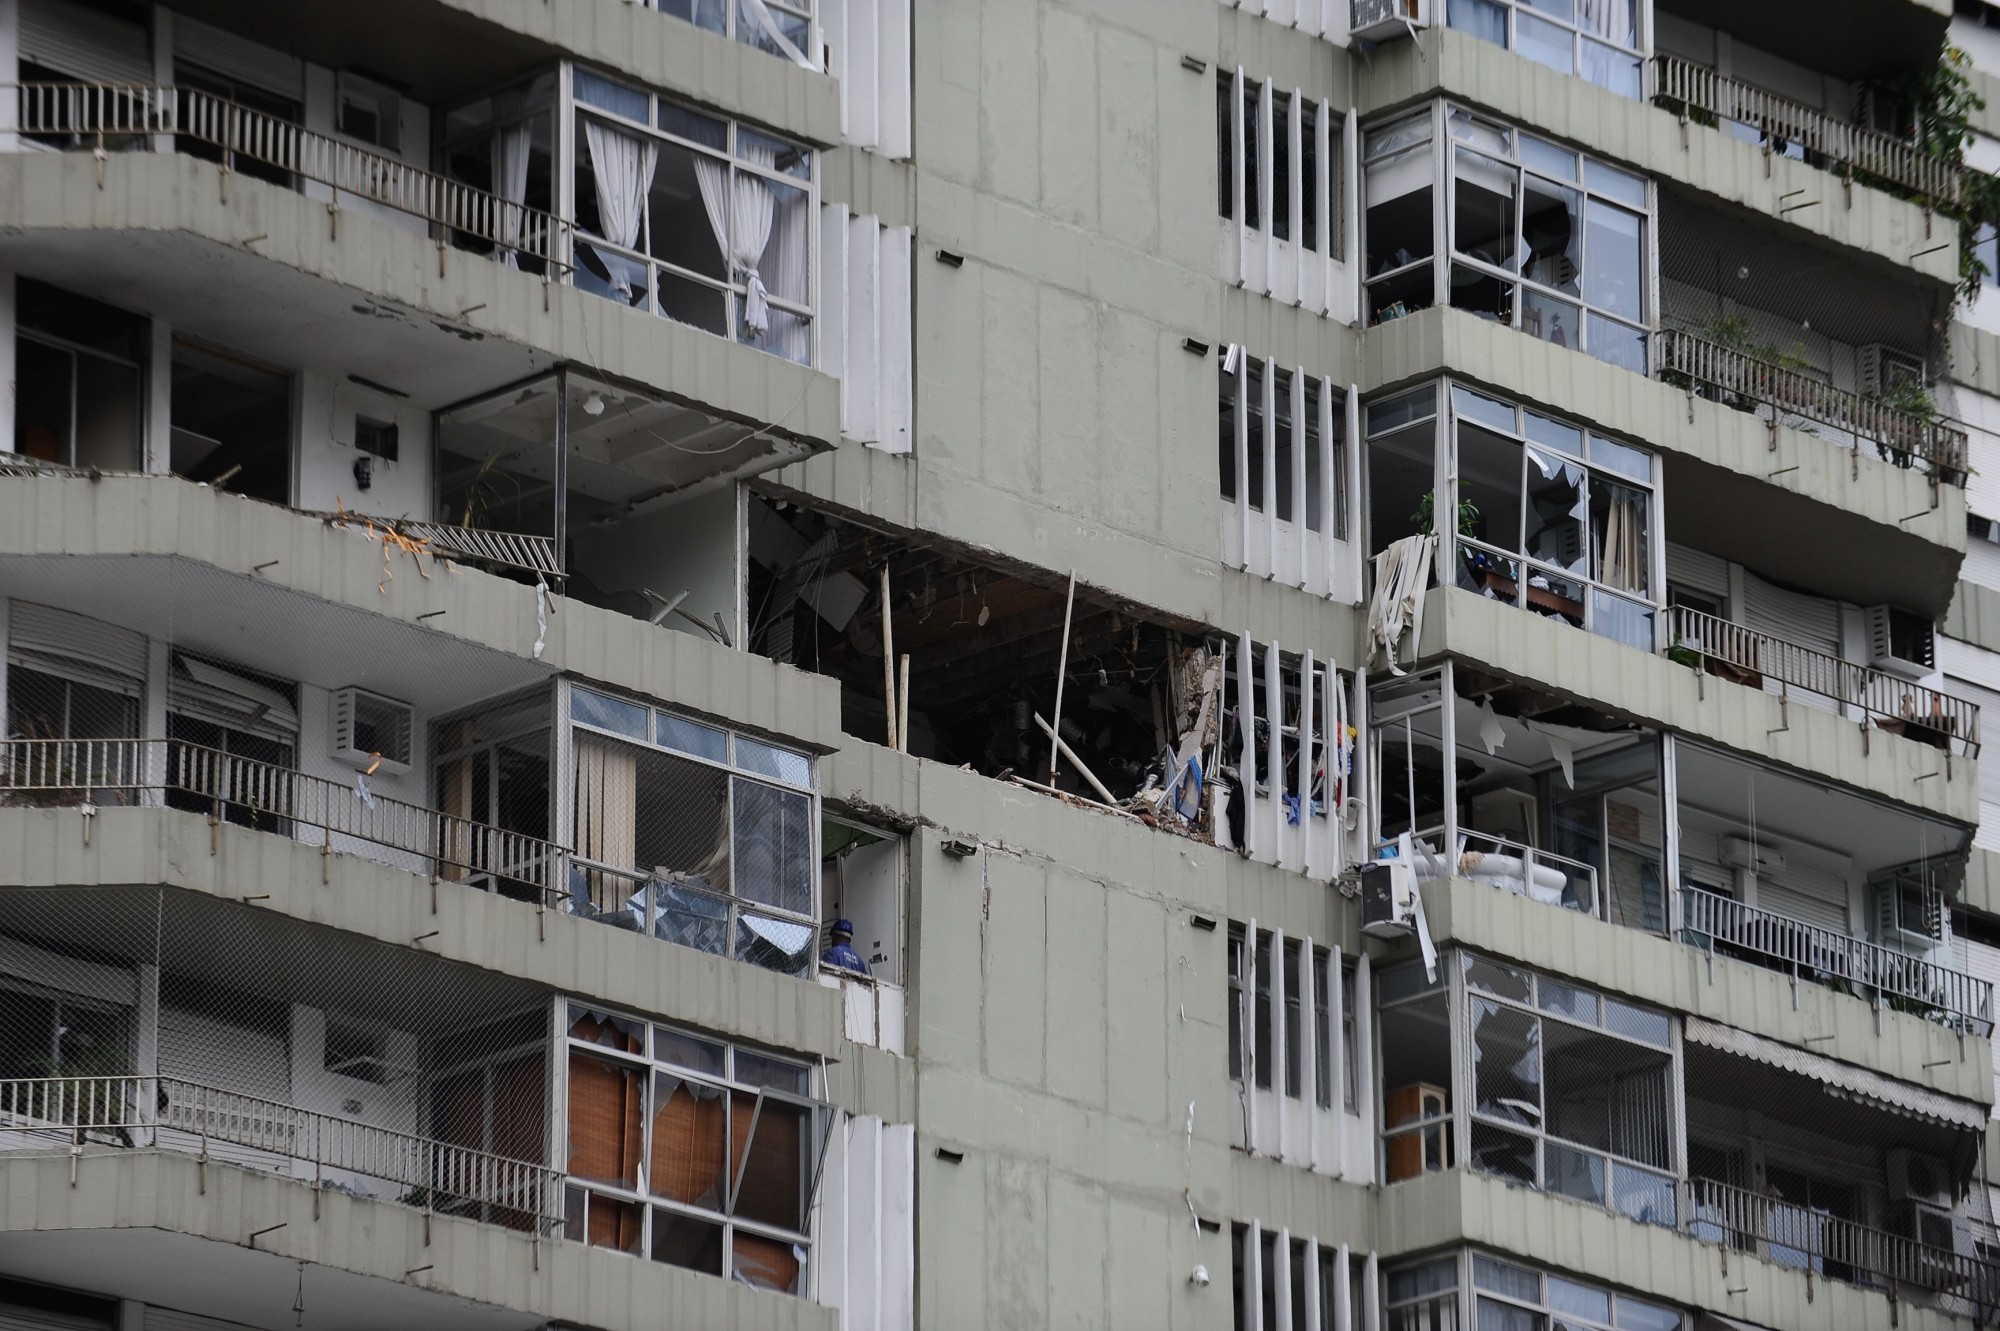 Gas Leak Most Likely Cause for Explosion in Rio Building